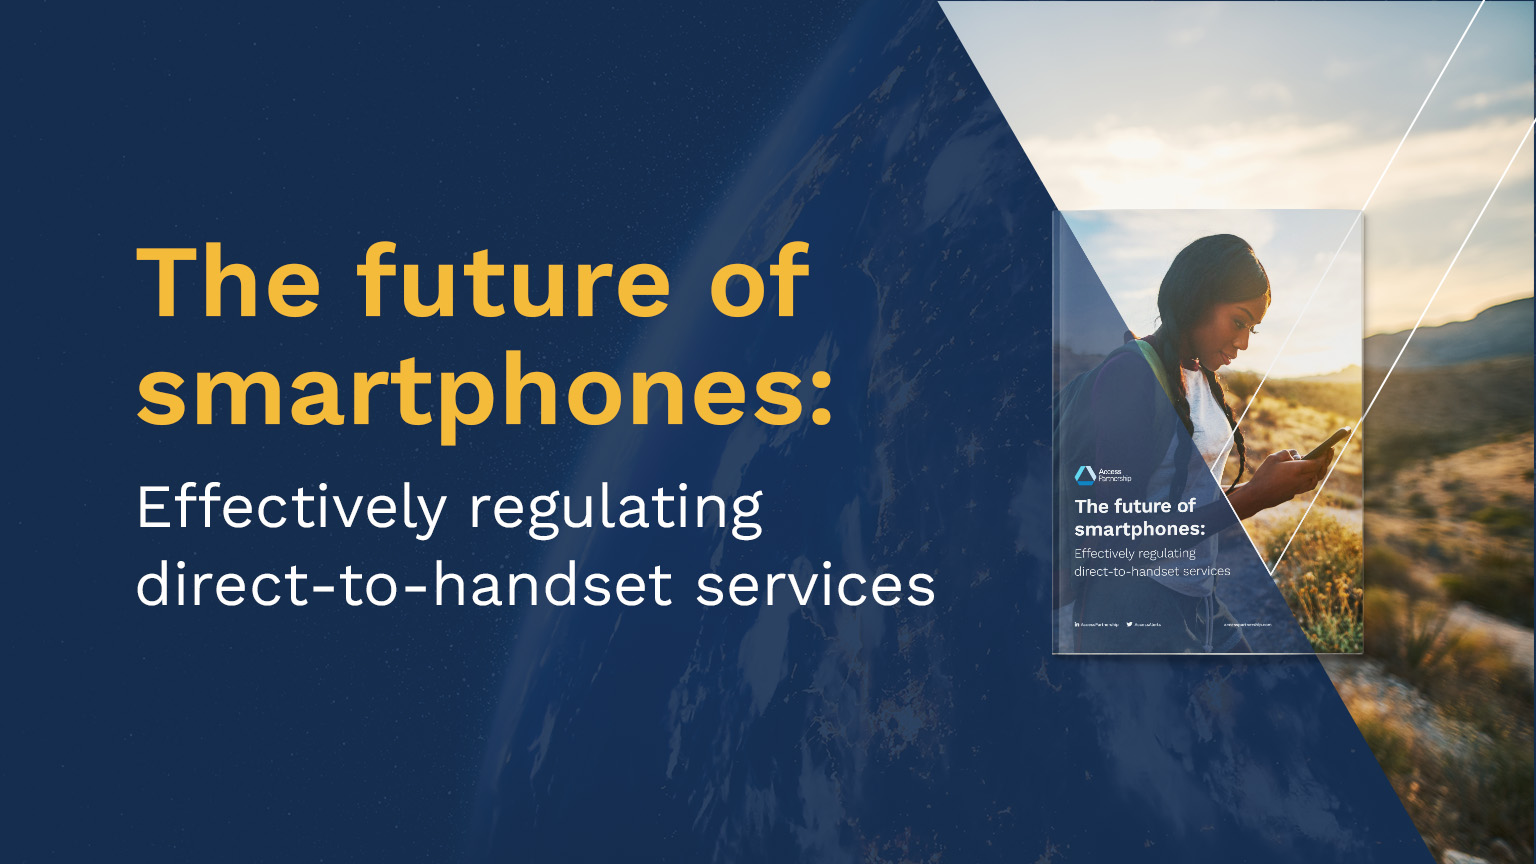 The future of smartphones: Effectively regulating direct-to-handsets services